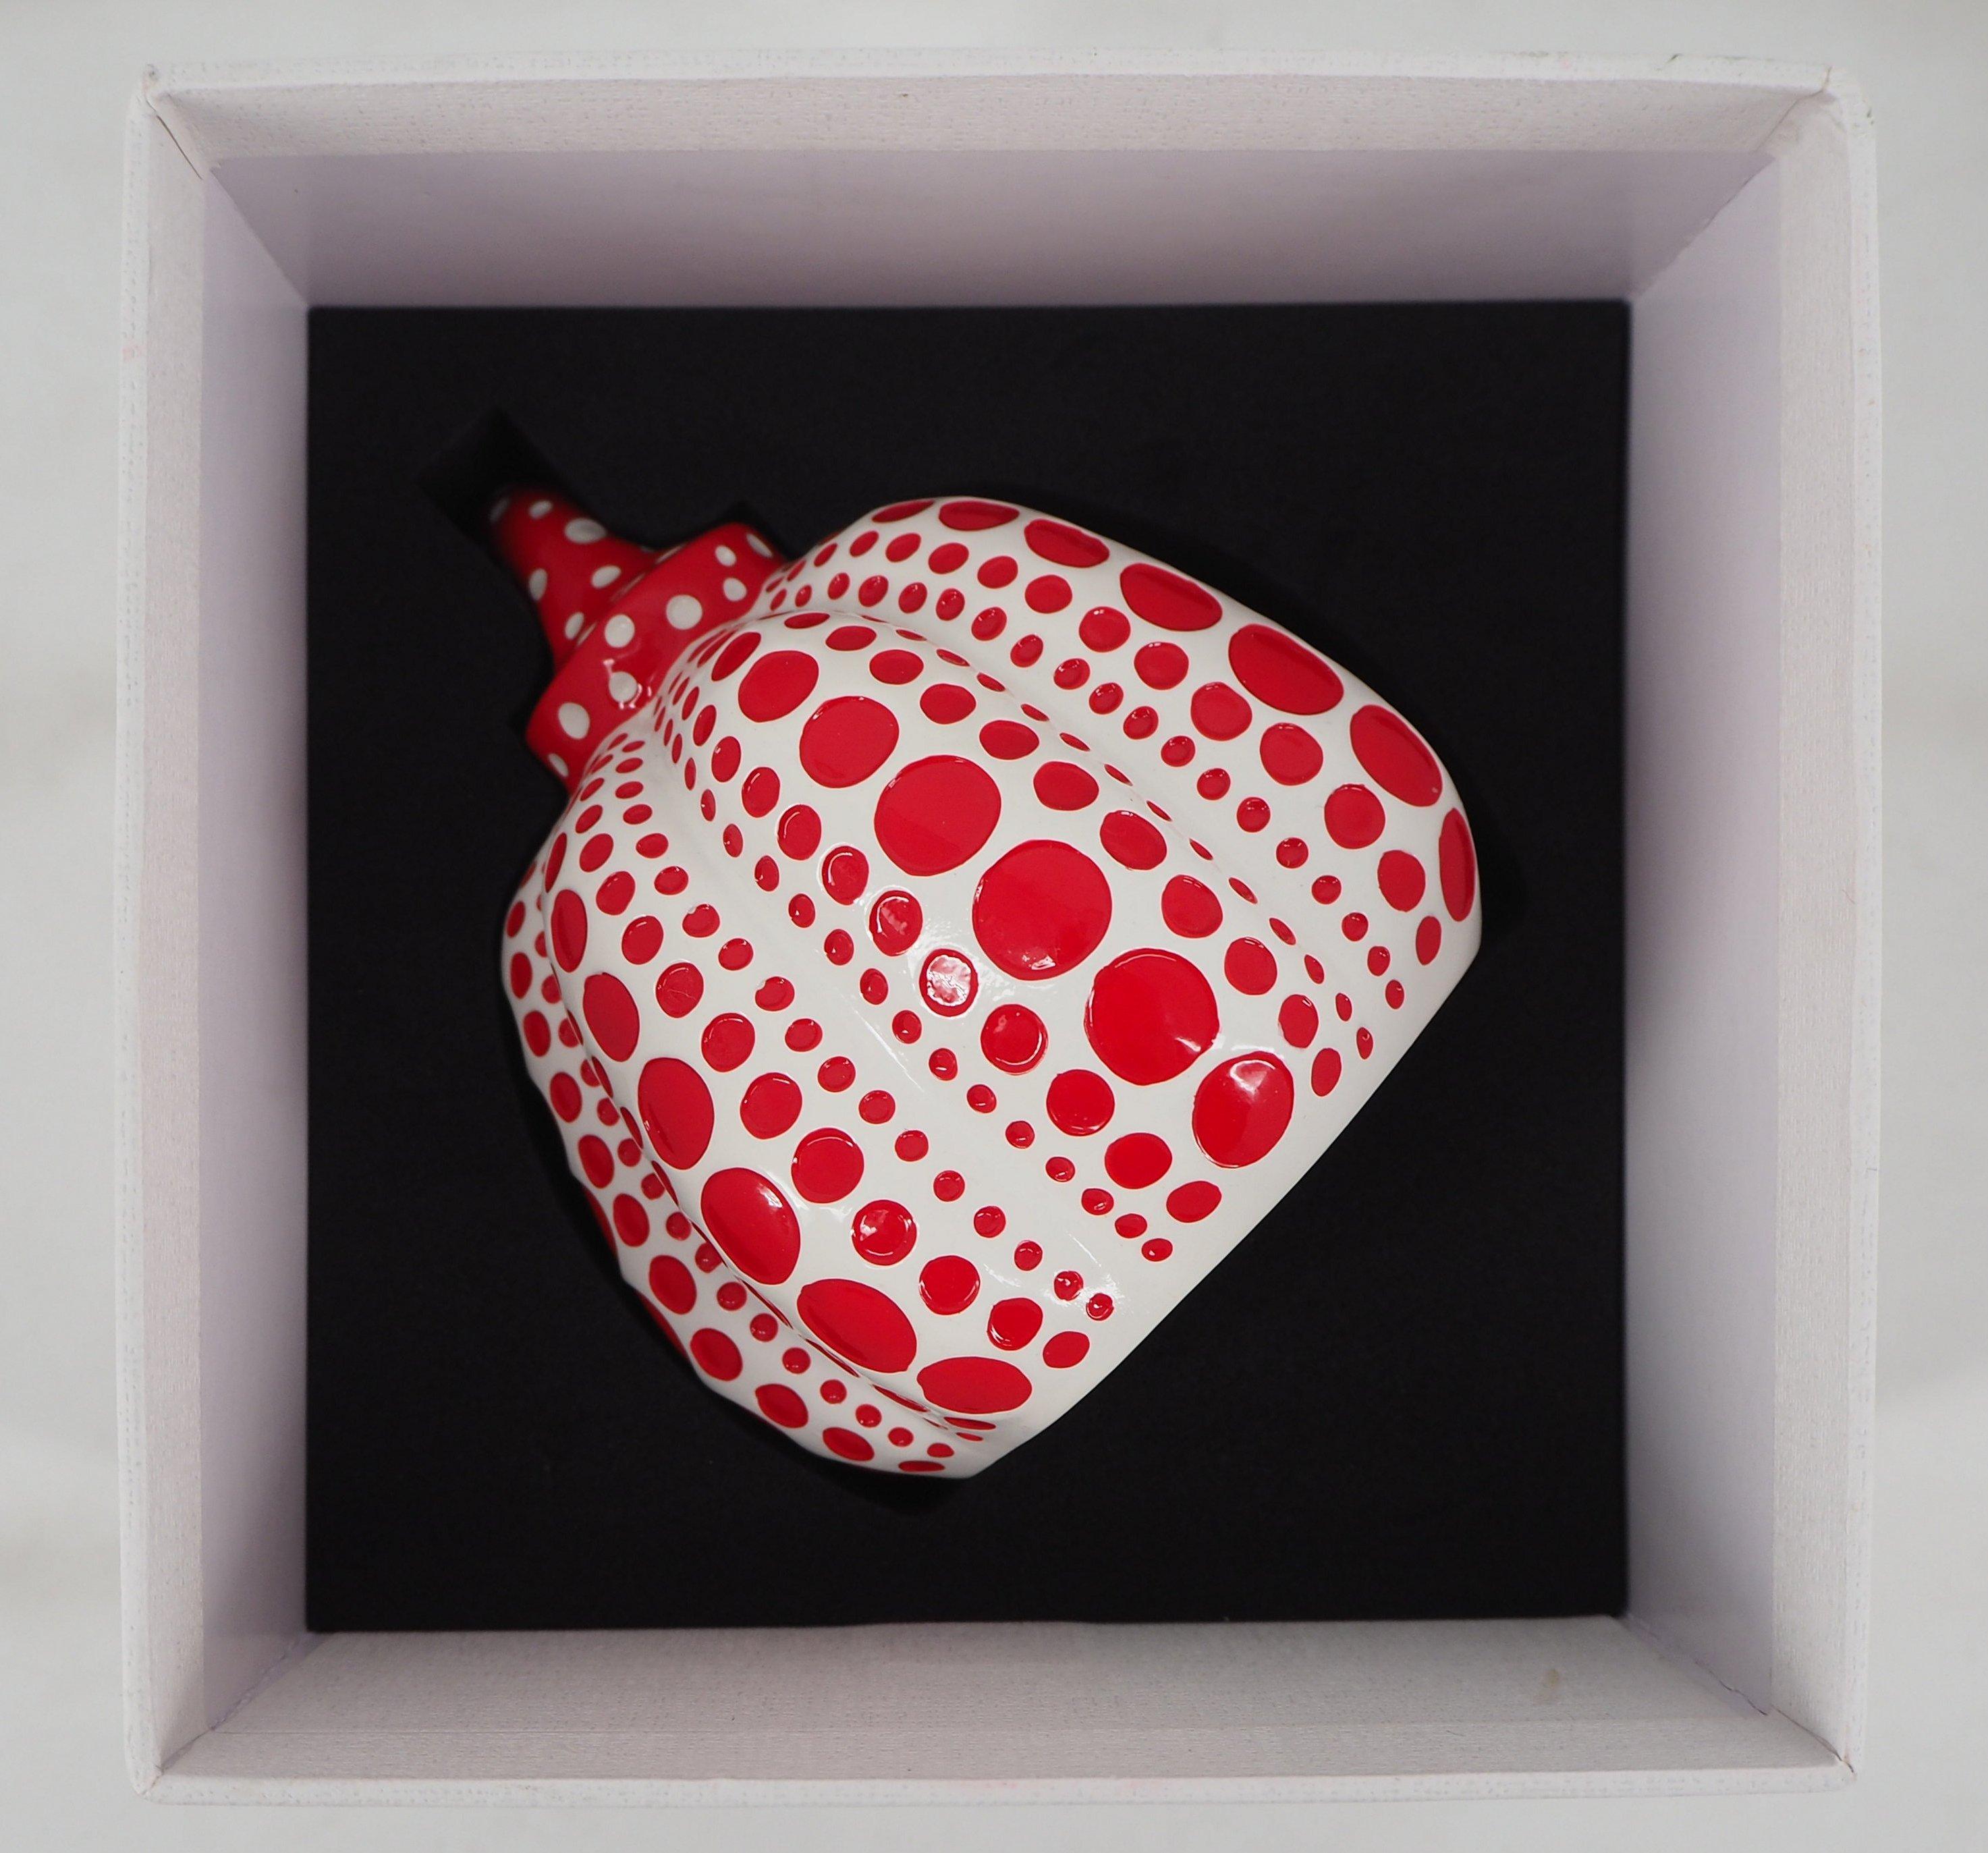 Red Pumpkin (Dot Obsession Red) - Original sculpture with original case - Sculpture by Yayoi Kusama